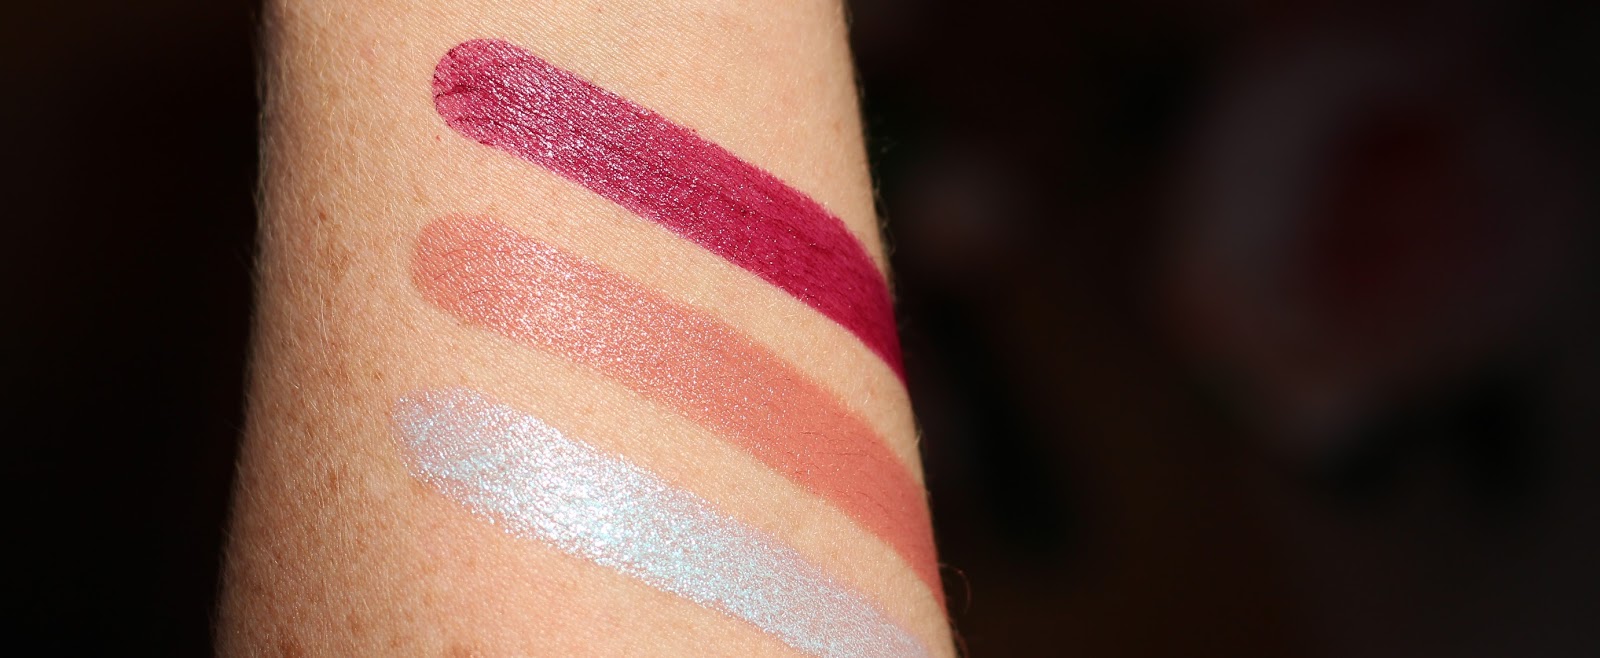 Too Faced La Créme Color Drenched Lipstick: Review & Swatches.